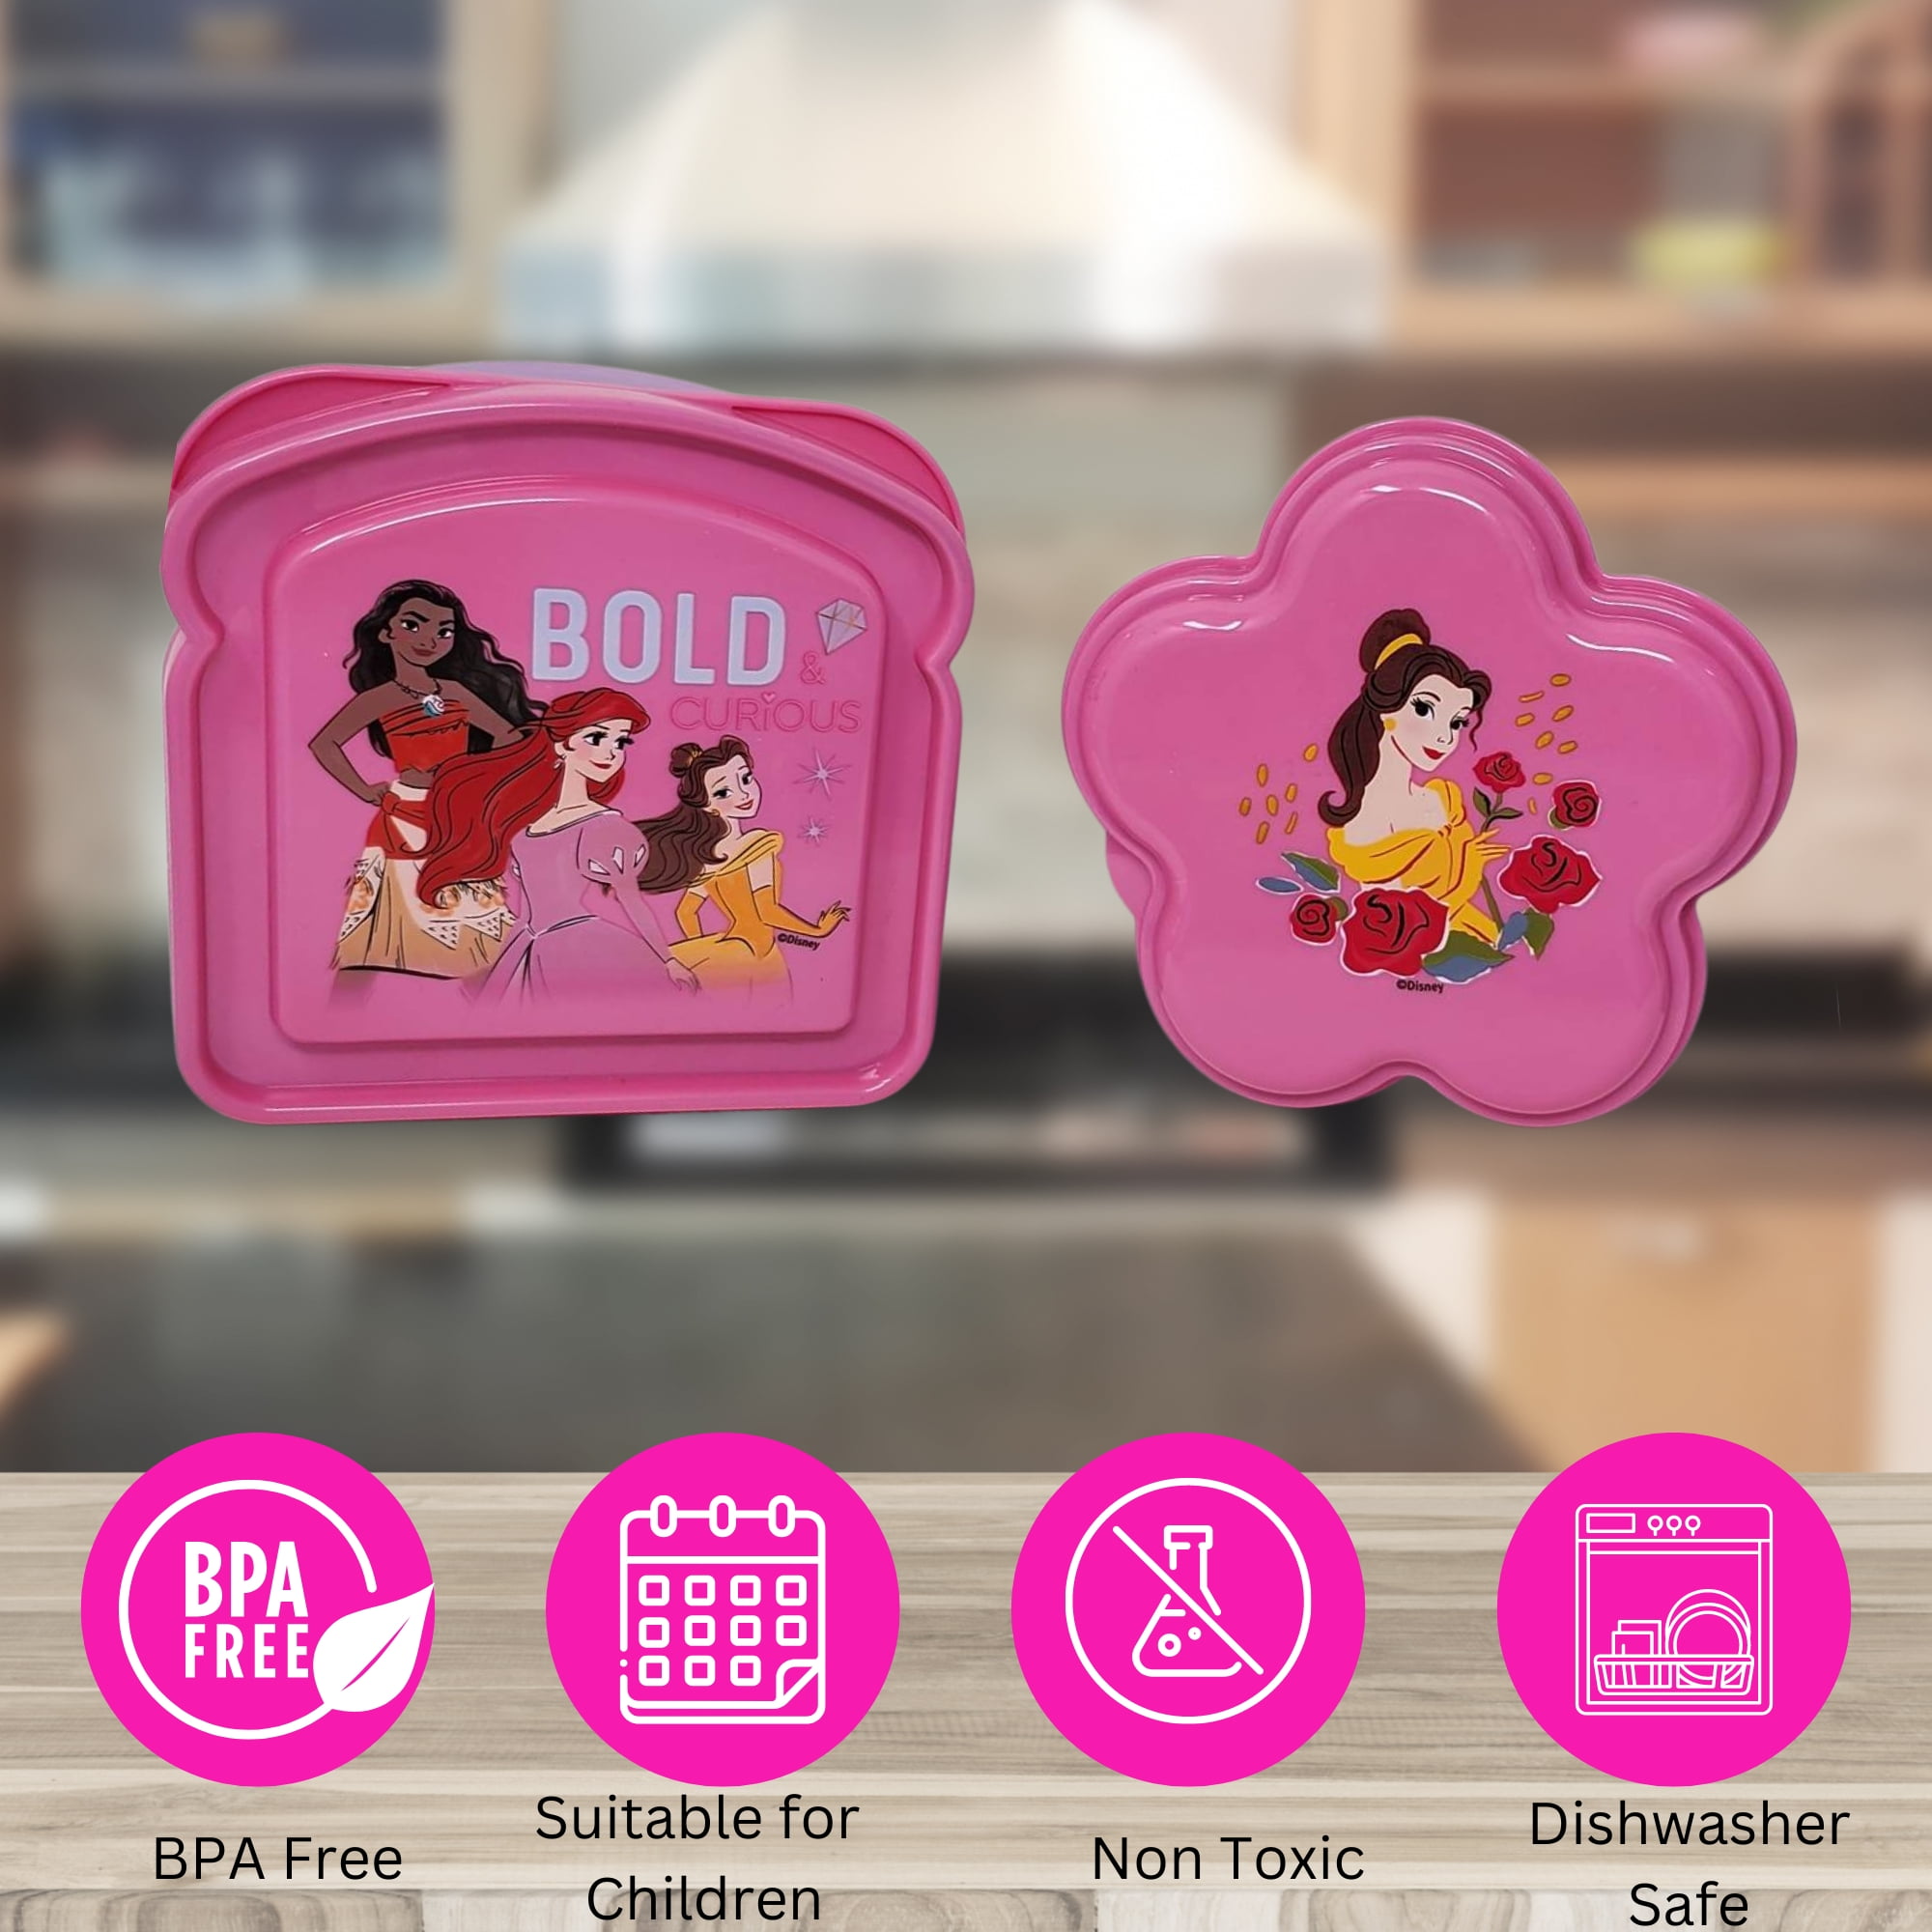 Girl Princess Secret Jouju Kids Stainless Lunch box With Bag Set Food  Container